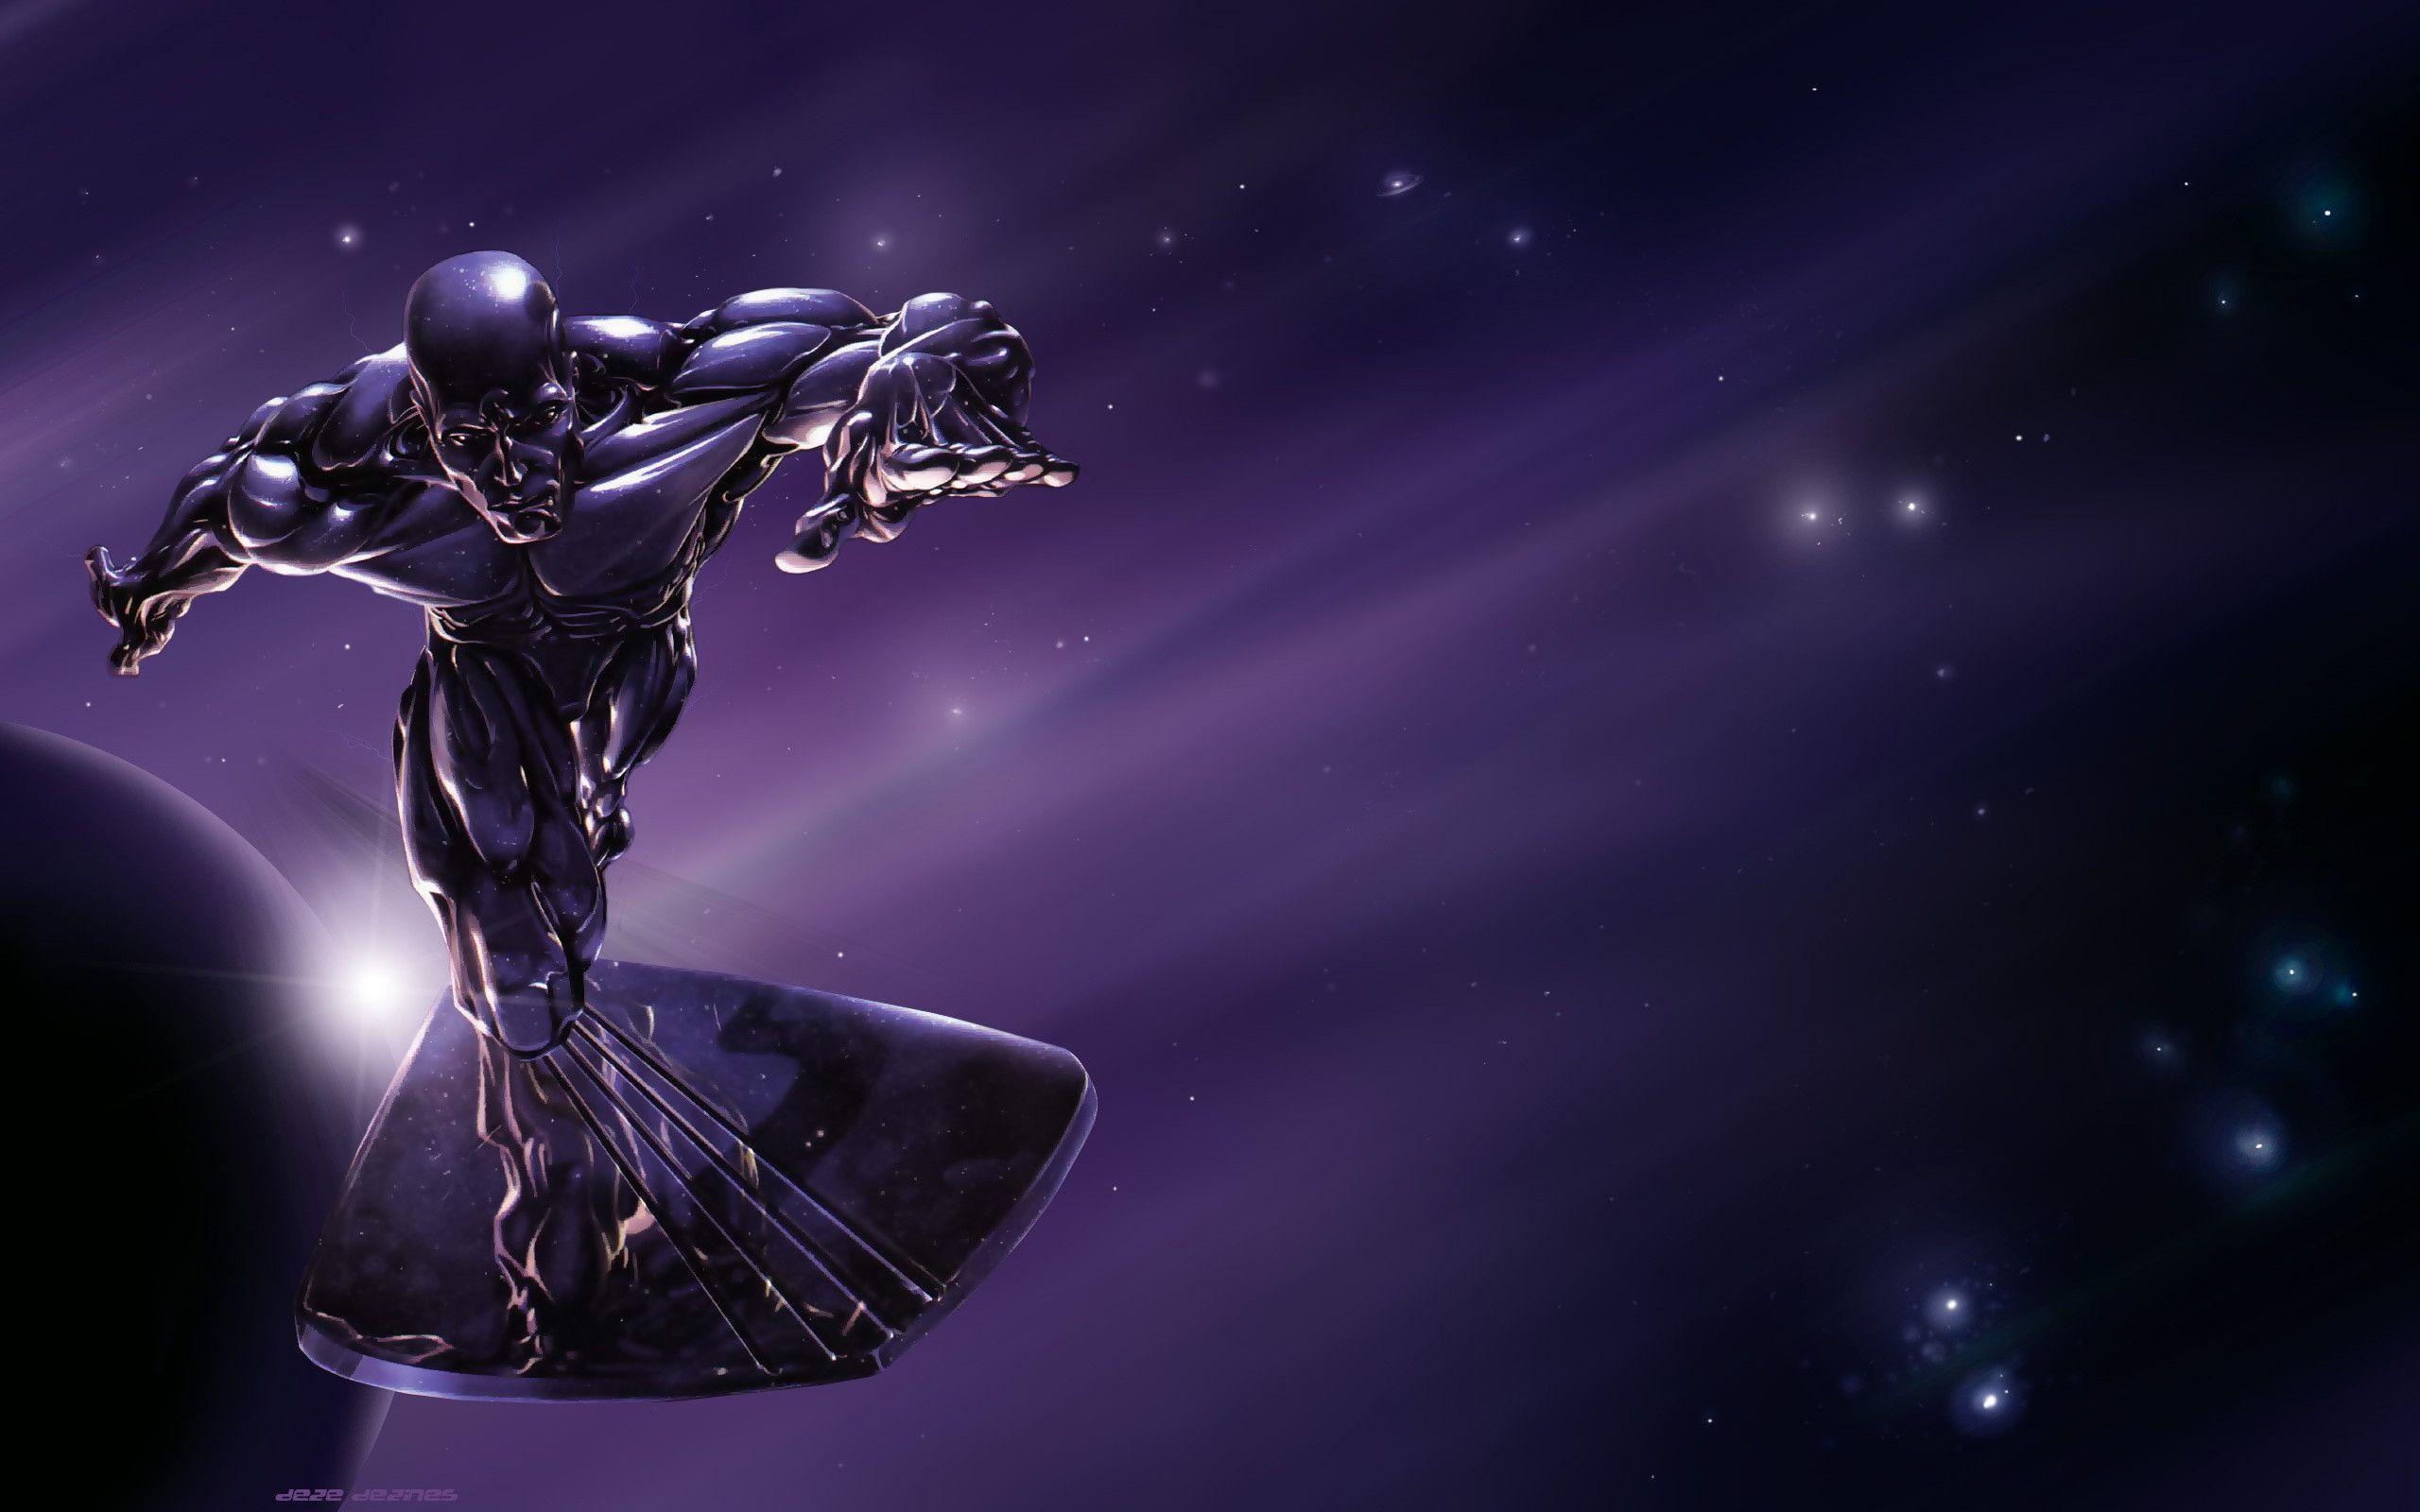 Silver Surfer Wallpapers Wallpaper Cave